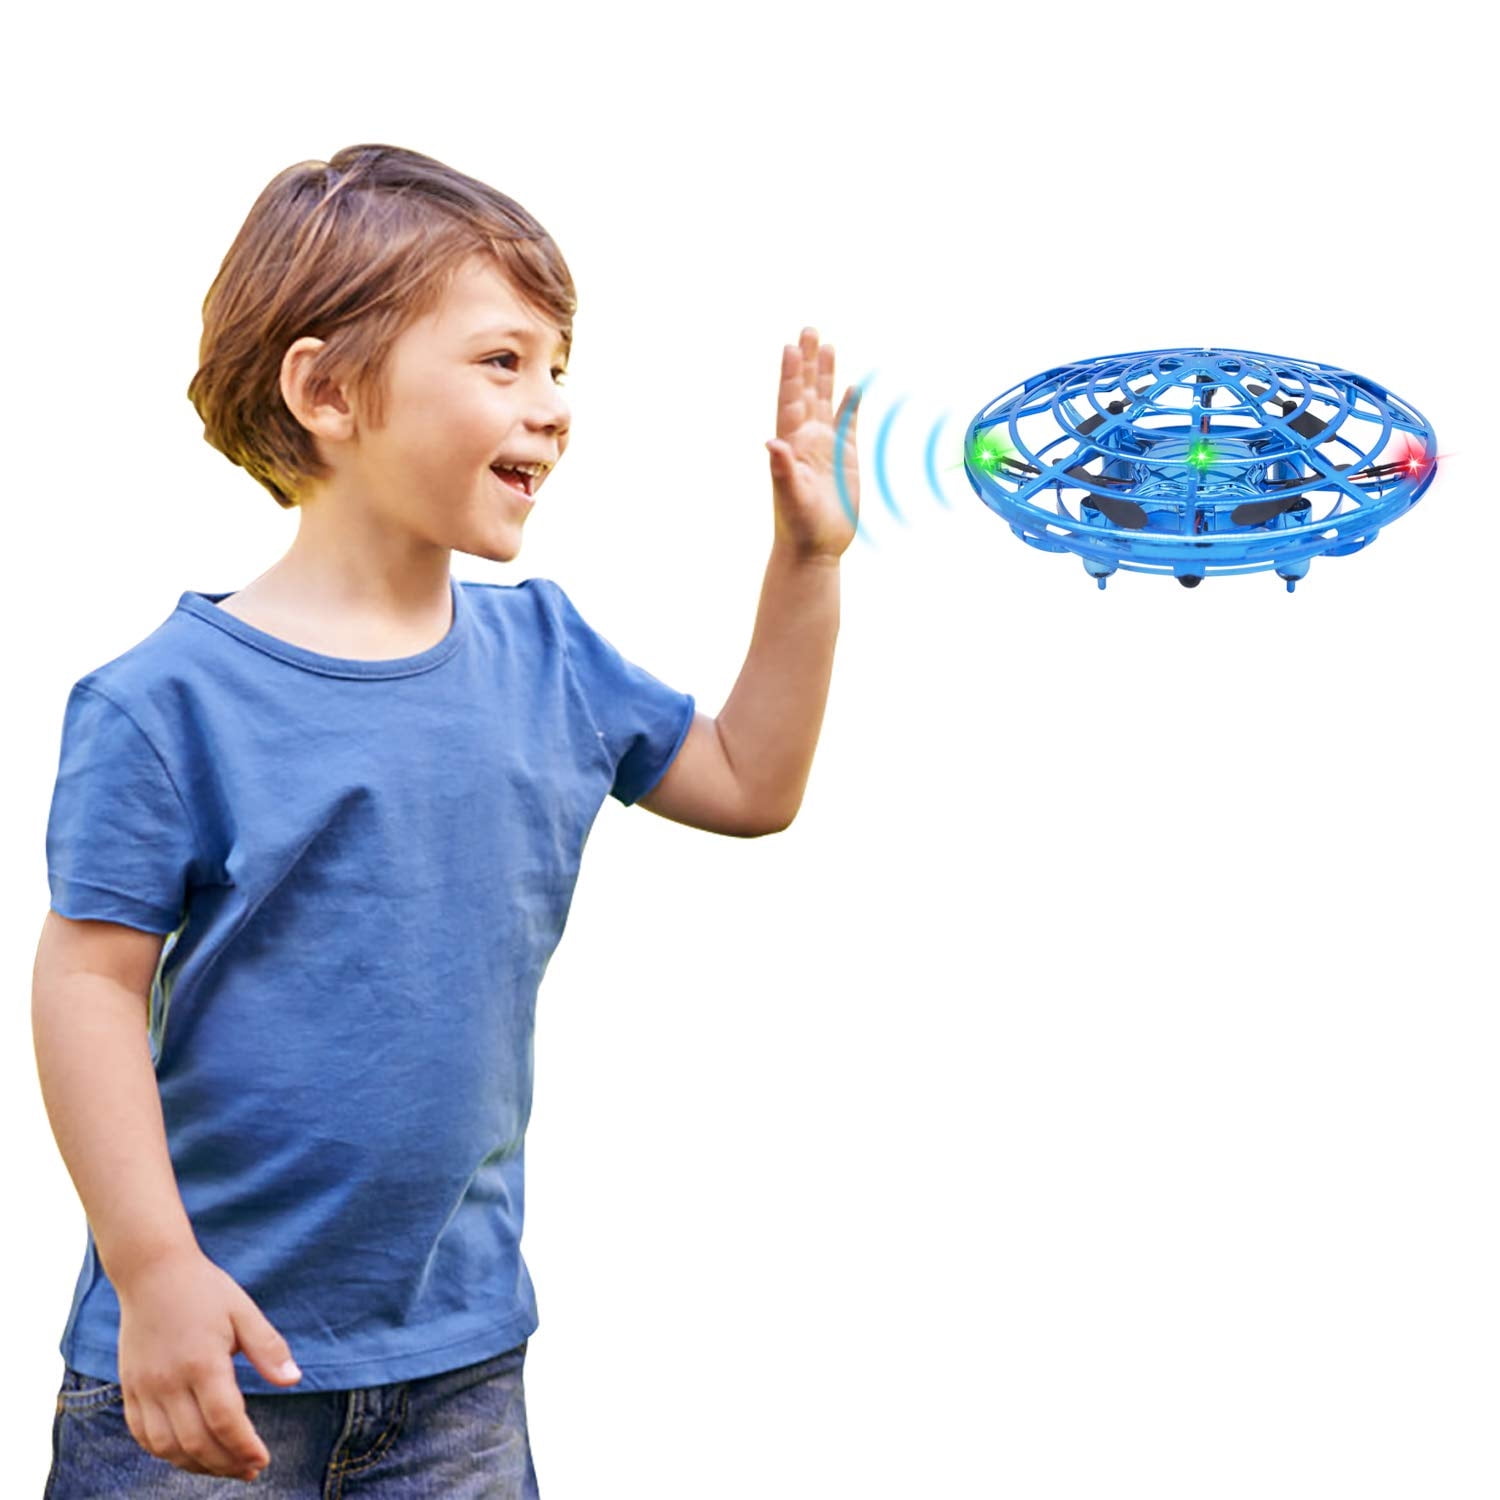 SHWD Drones for Kids UFO Drone Mini Kids Drone with Led Lights Hand Operated Child Drones Flying Ball Drone Toy 360 Rotating Helicopter for Boys Girls Adult Outdoor Indoor 